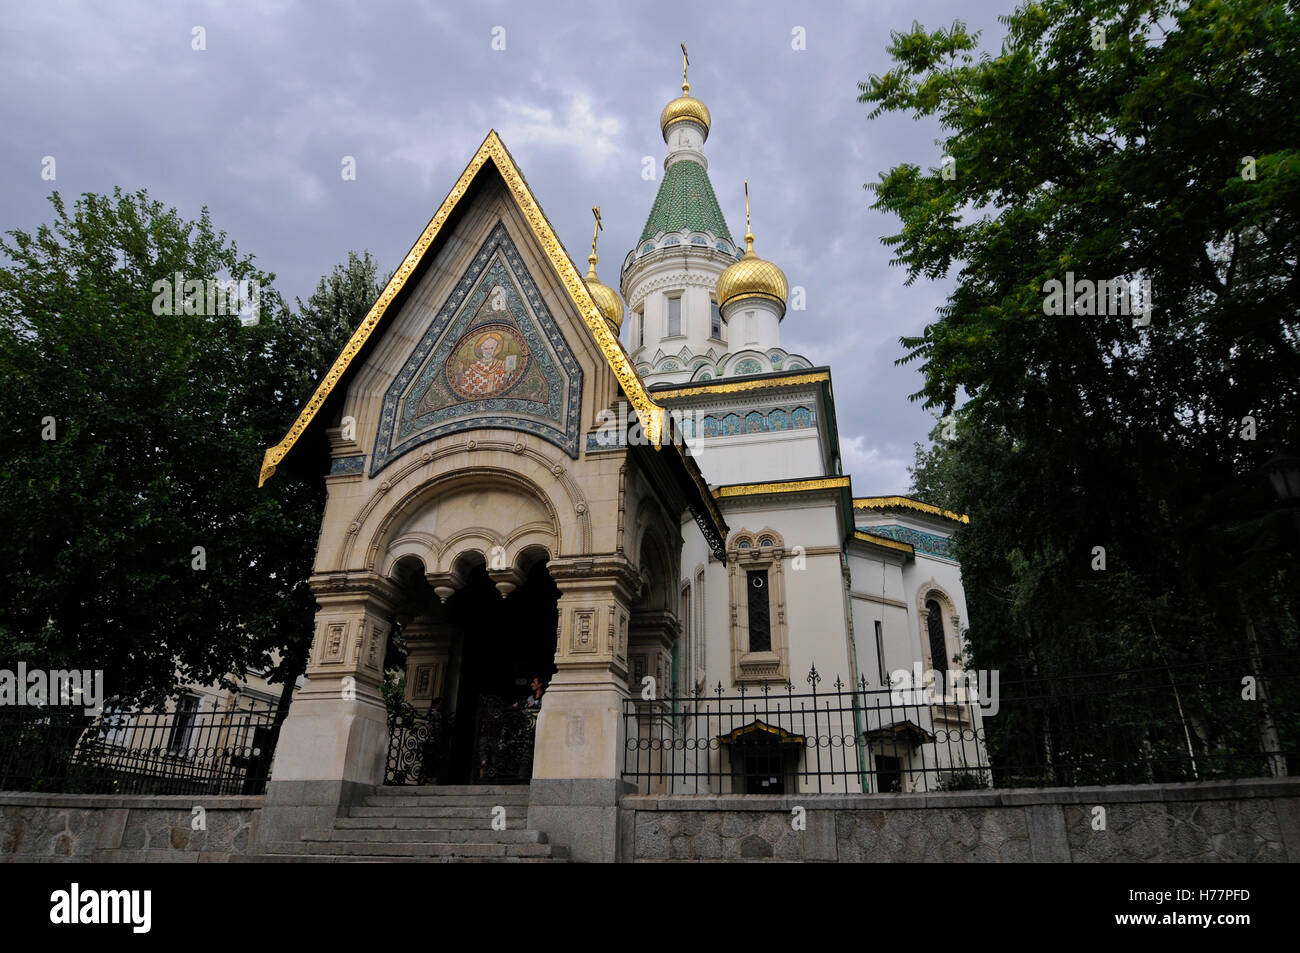 The Russian Church - Church of St Nicholas the Miracle-Maker , a Russian Orthodox church in central Sofia, Bulgaria. Stock Photo